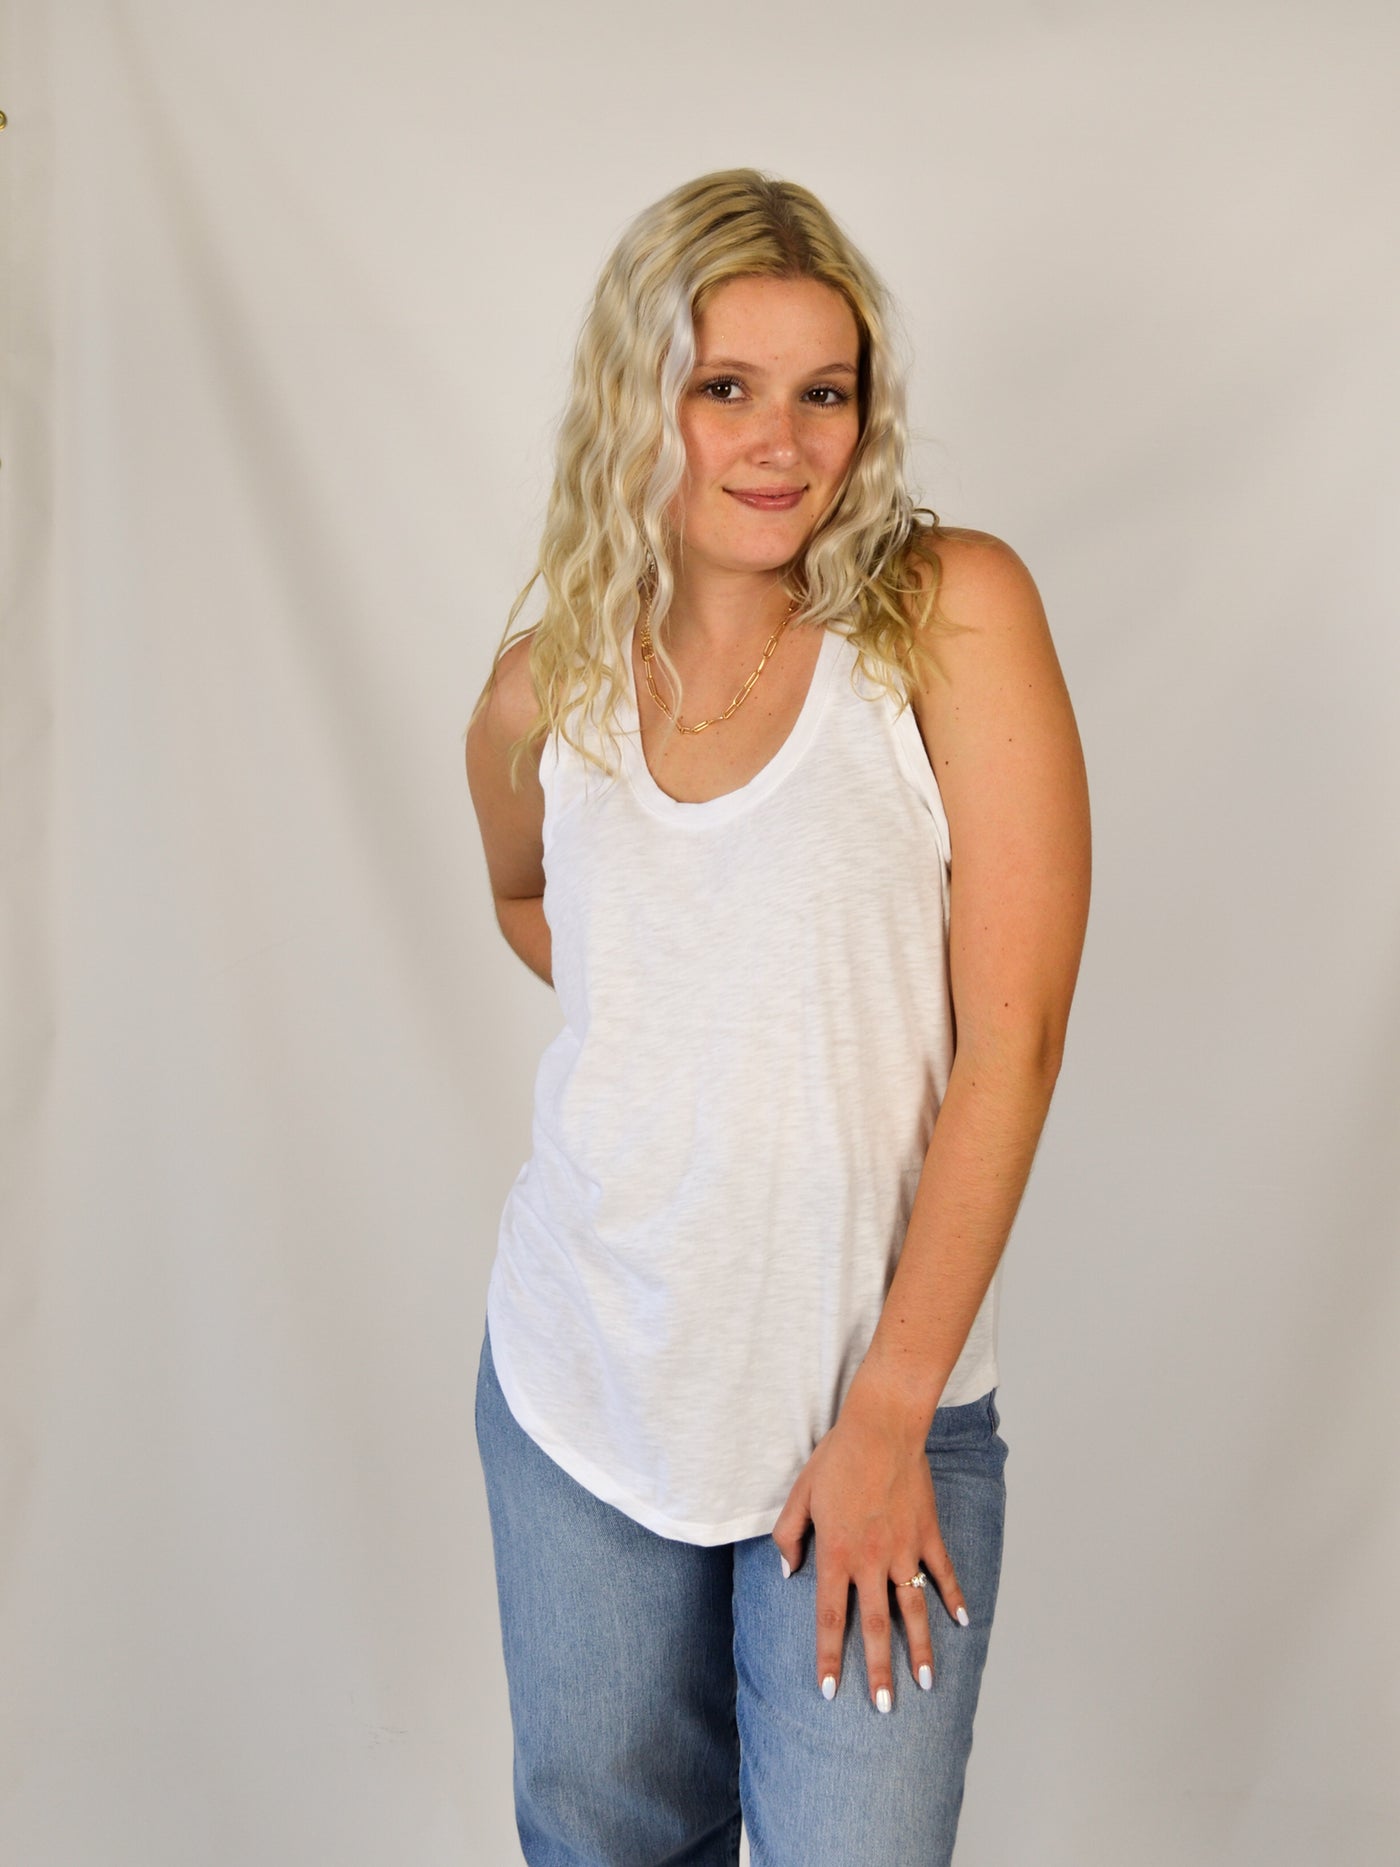 A model wearing a white slub, relaxed fit tank top with a curved hem. Th model has it on with light wash denim jeans.